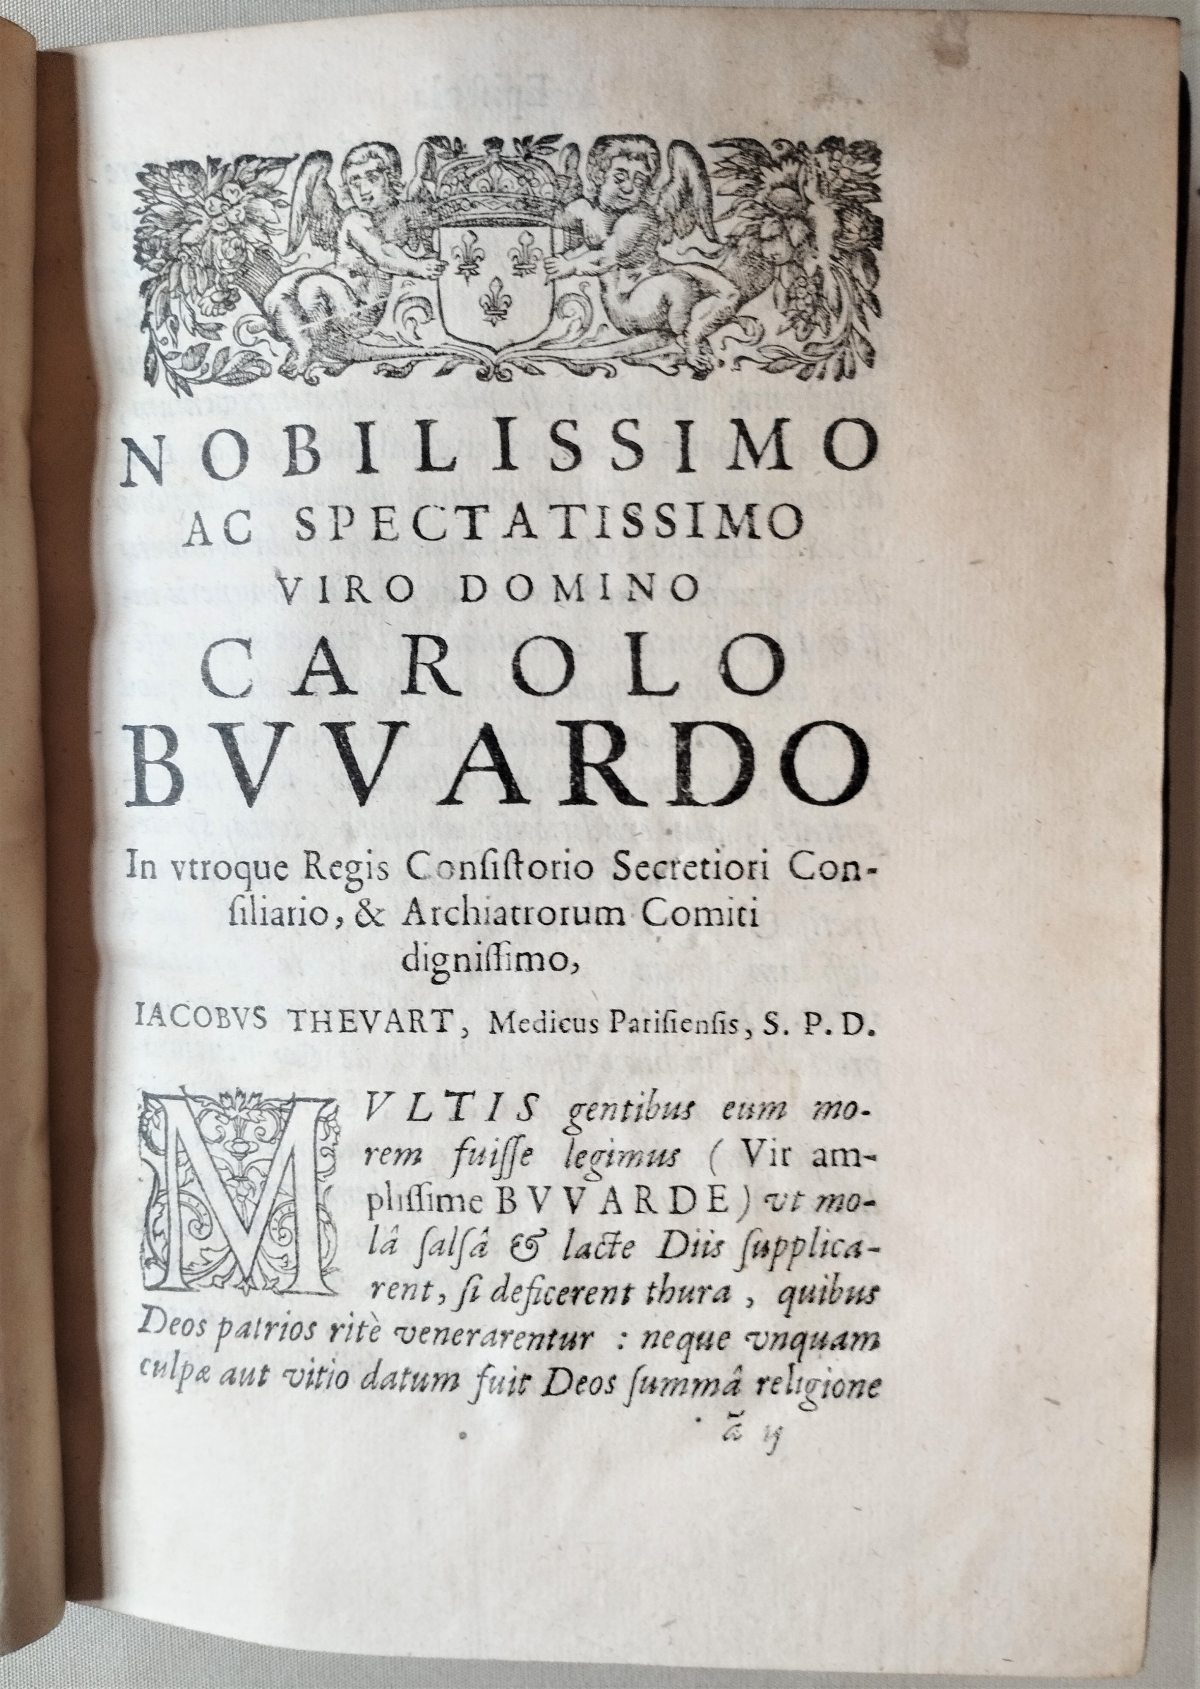 An unnumbered page in a 17th-century printed book, with a decorative woodcut above a dedication in Latin beginning 'Nobilissimo ac spectatissimo viro domino Carolo Buvardo ...'